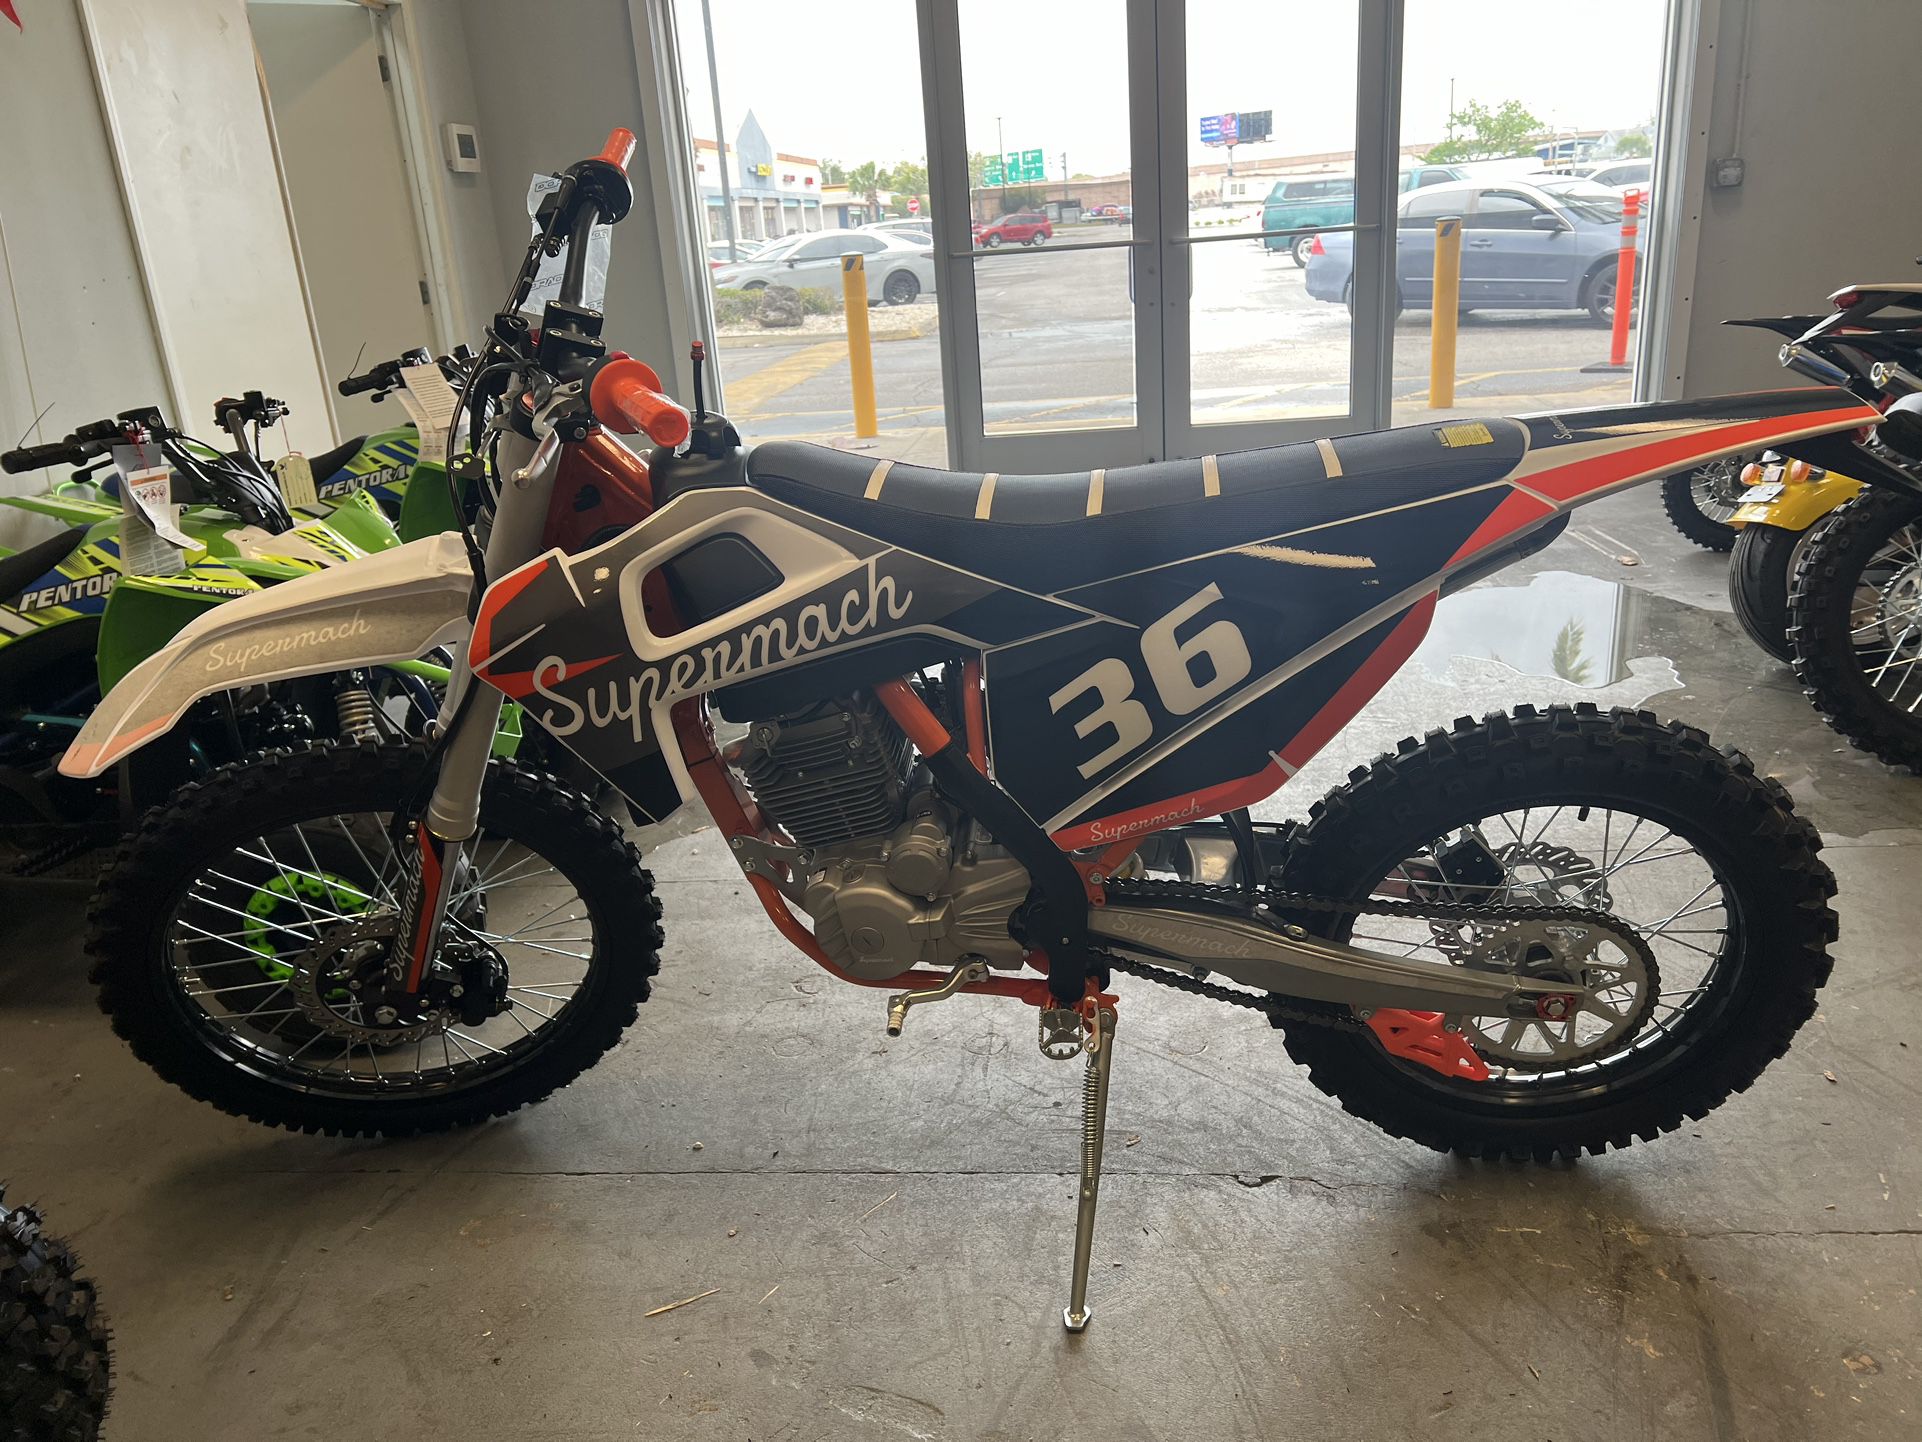 SuperMach 250CC Dirt Bike! Finance For $50 Down Payment!!